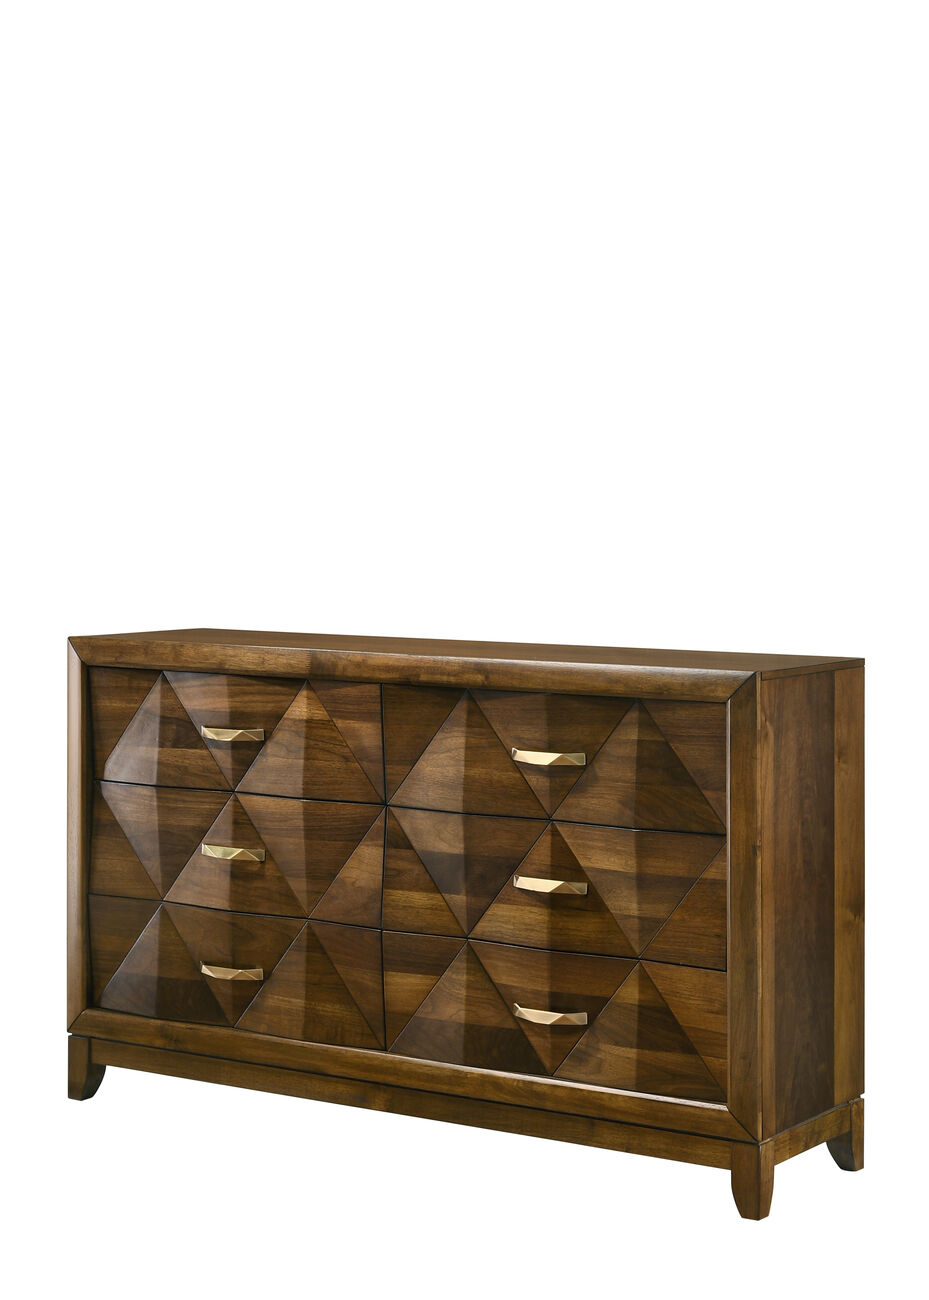 Transitional Style 6 Drawer Wooden Dresser with Chamfered Legs, Brown